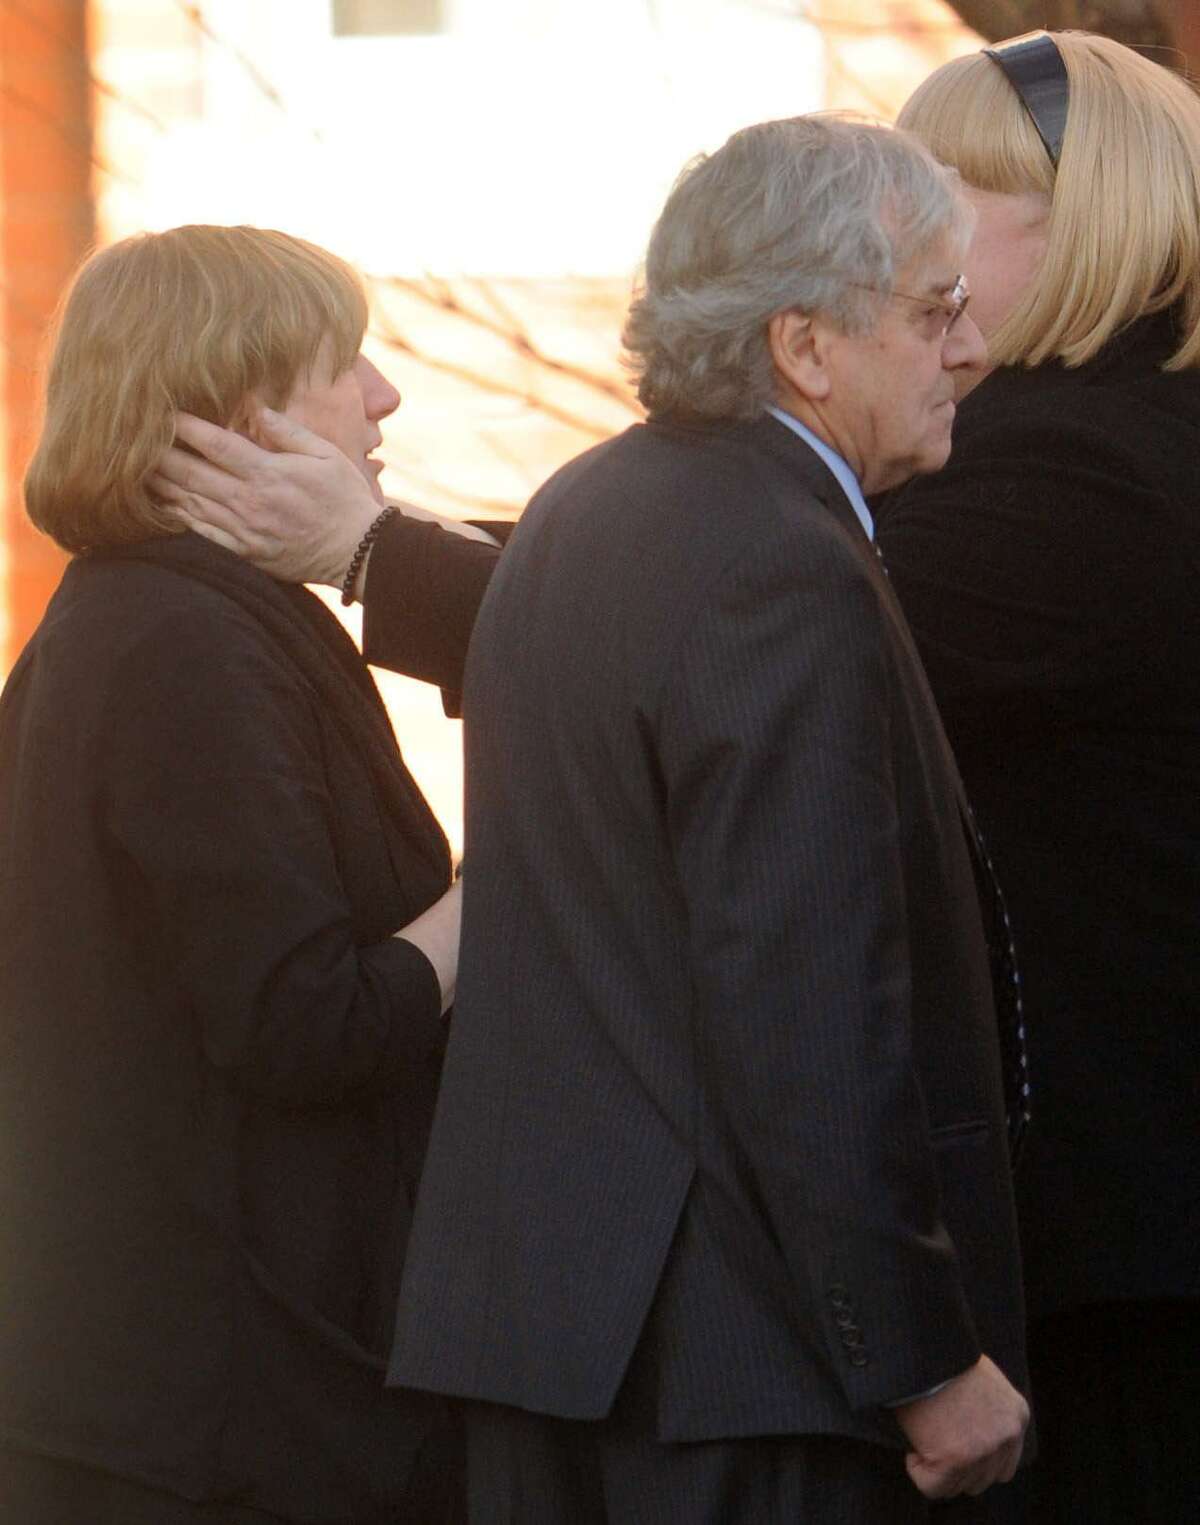 Teresa Rousseau, left, is comforted with conversation by a mourner, as Gilles Rousseau, second from left, waits with his ex-wife after a memorial service for their daughter Lauren Rousseau at the First Congregational Church in Danbury, Conn. Thursday, December 20, 2012. Rousseau was a substitute teacher killed by a gunman that also claimed the lives of 5 other educators and 20 children at the Sandy Hook Elementary School shooting Friday, December 15, 2012. Lauren and Gilles Rousseau are divorced. Photo by Peter Hvizdak / New Haven Register